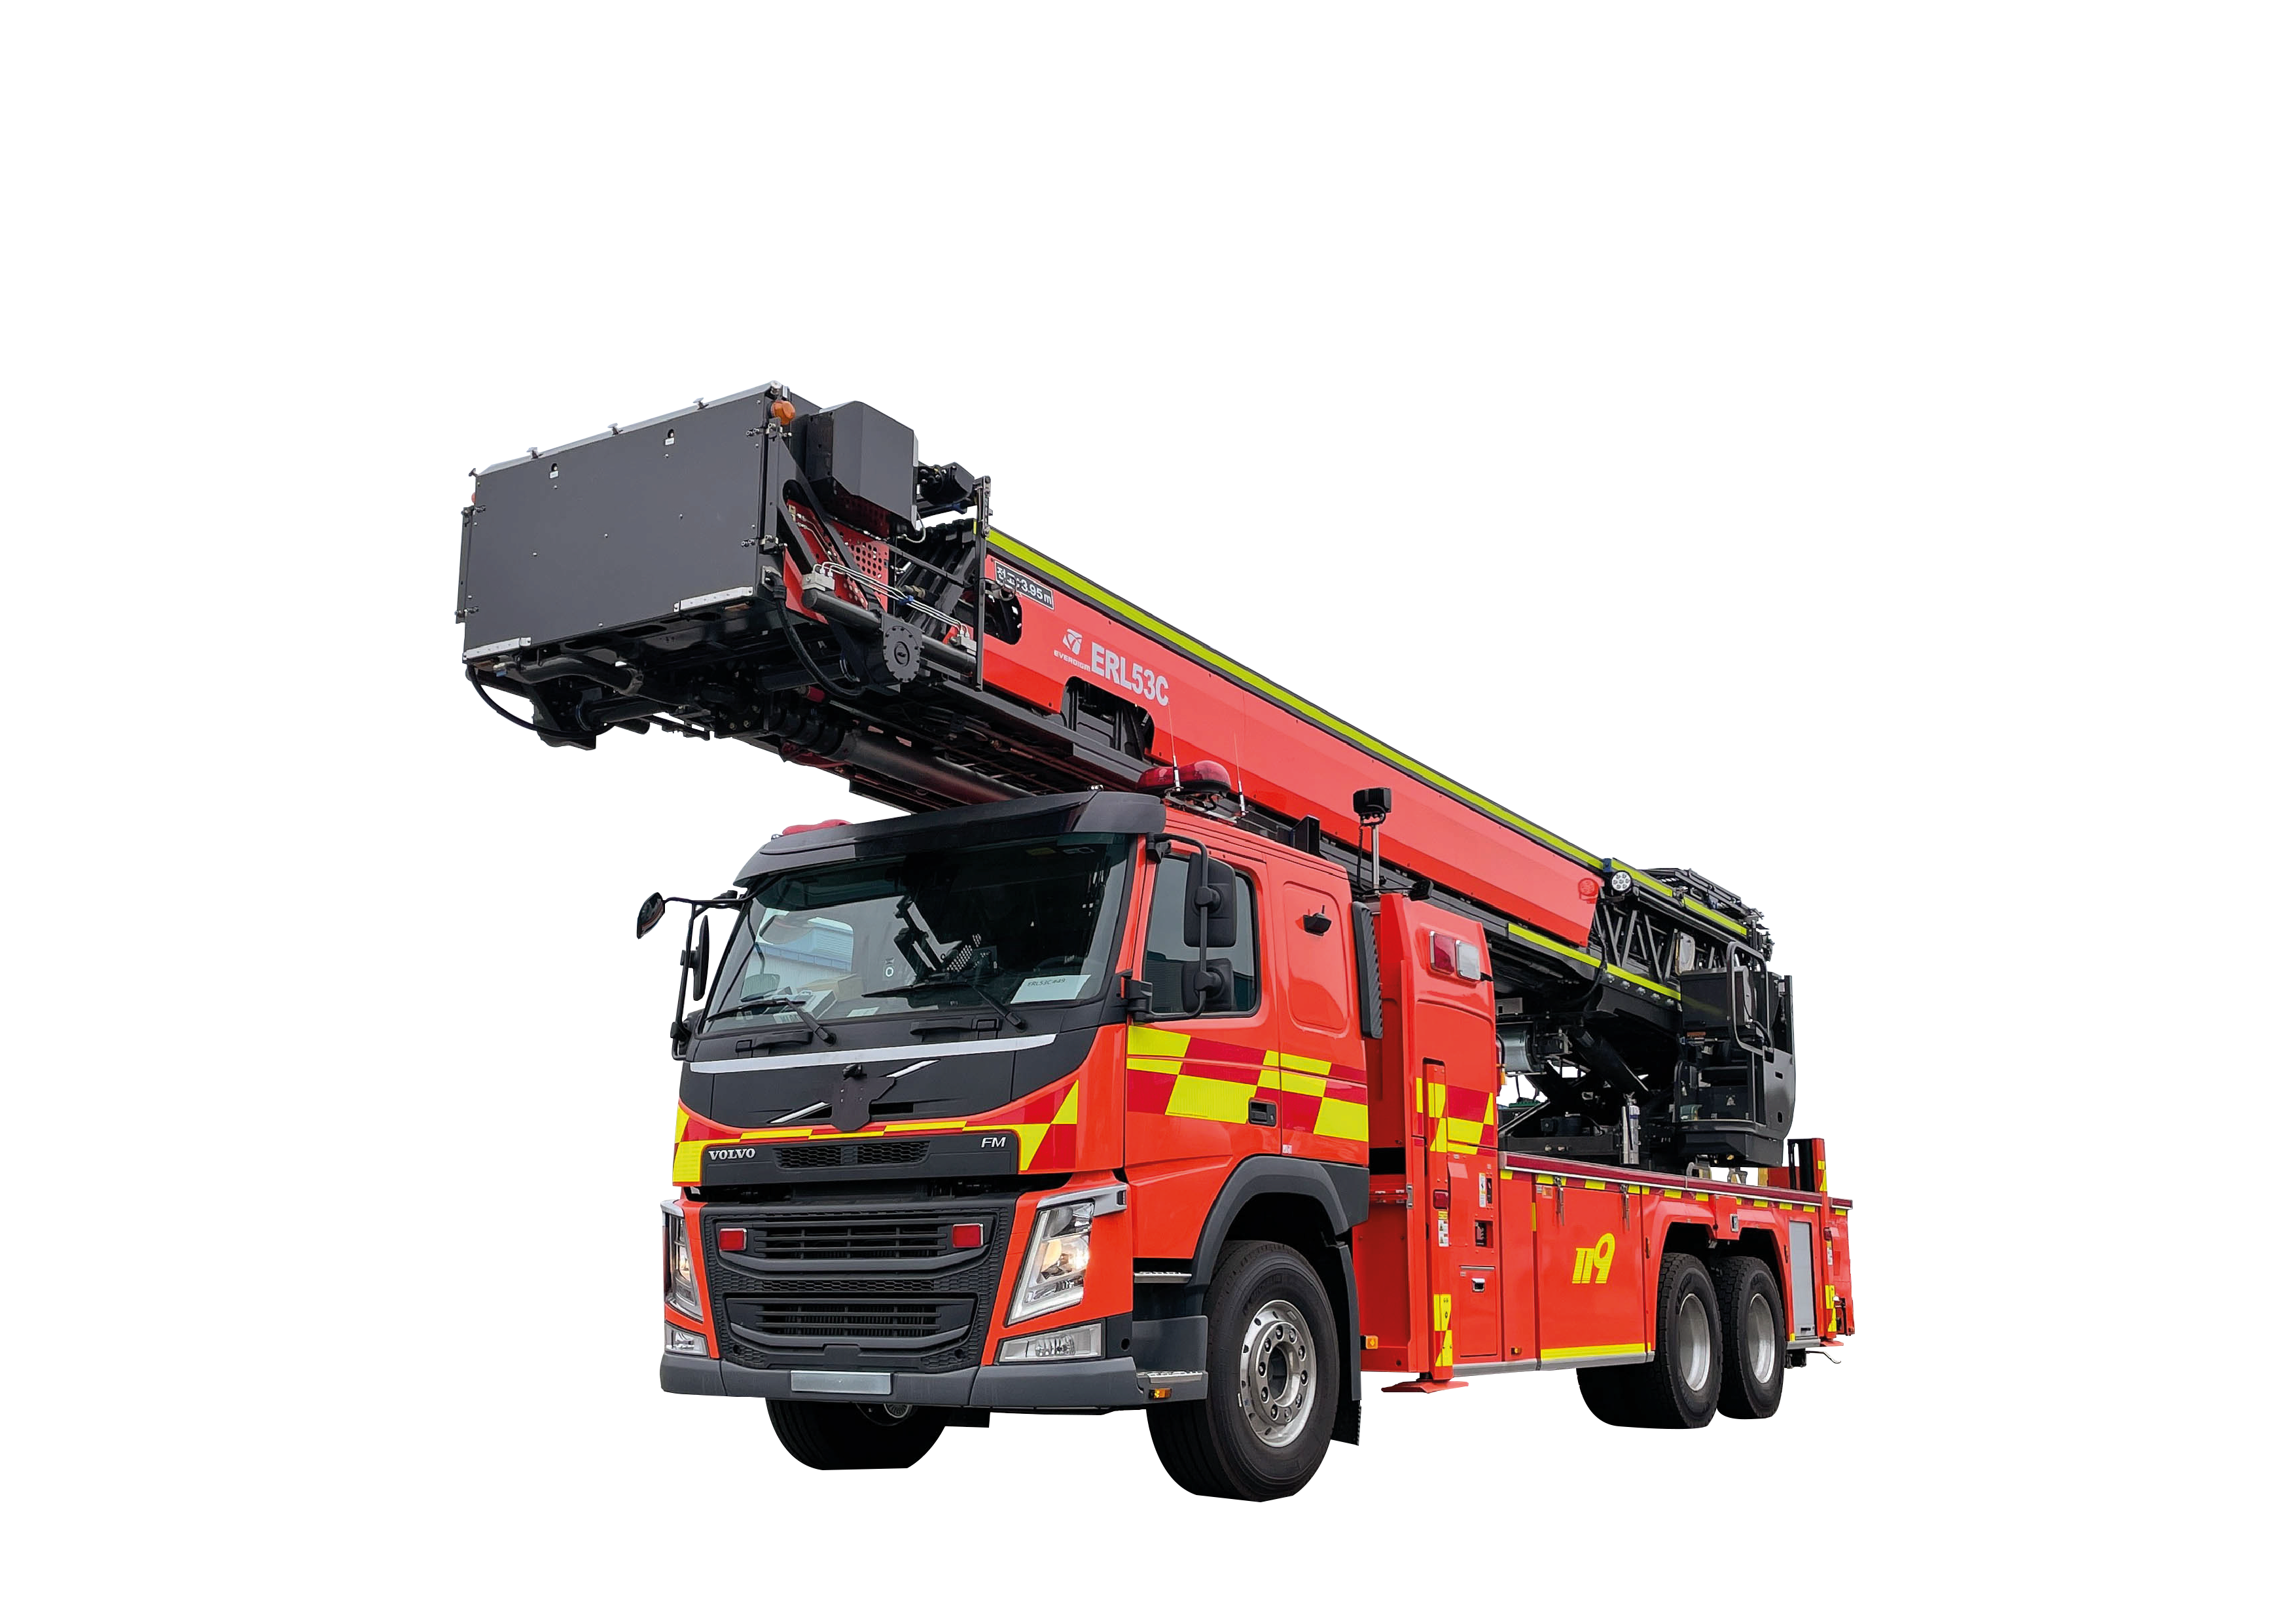 Firefighting Vehicle _ Turntable Ladder_ ERL 53